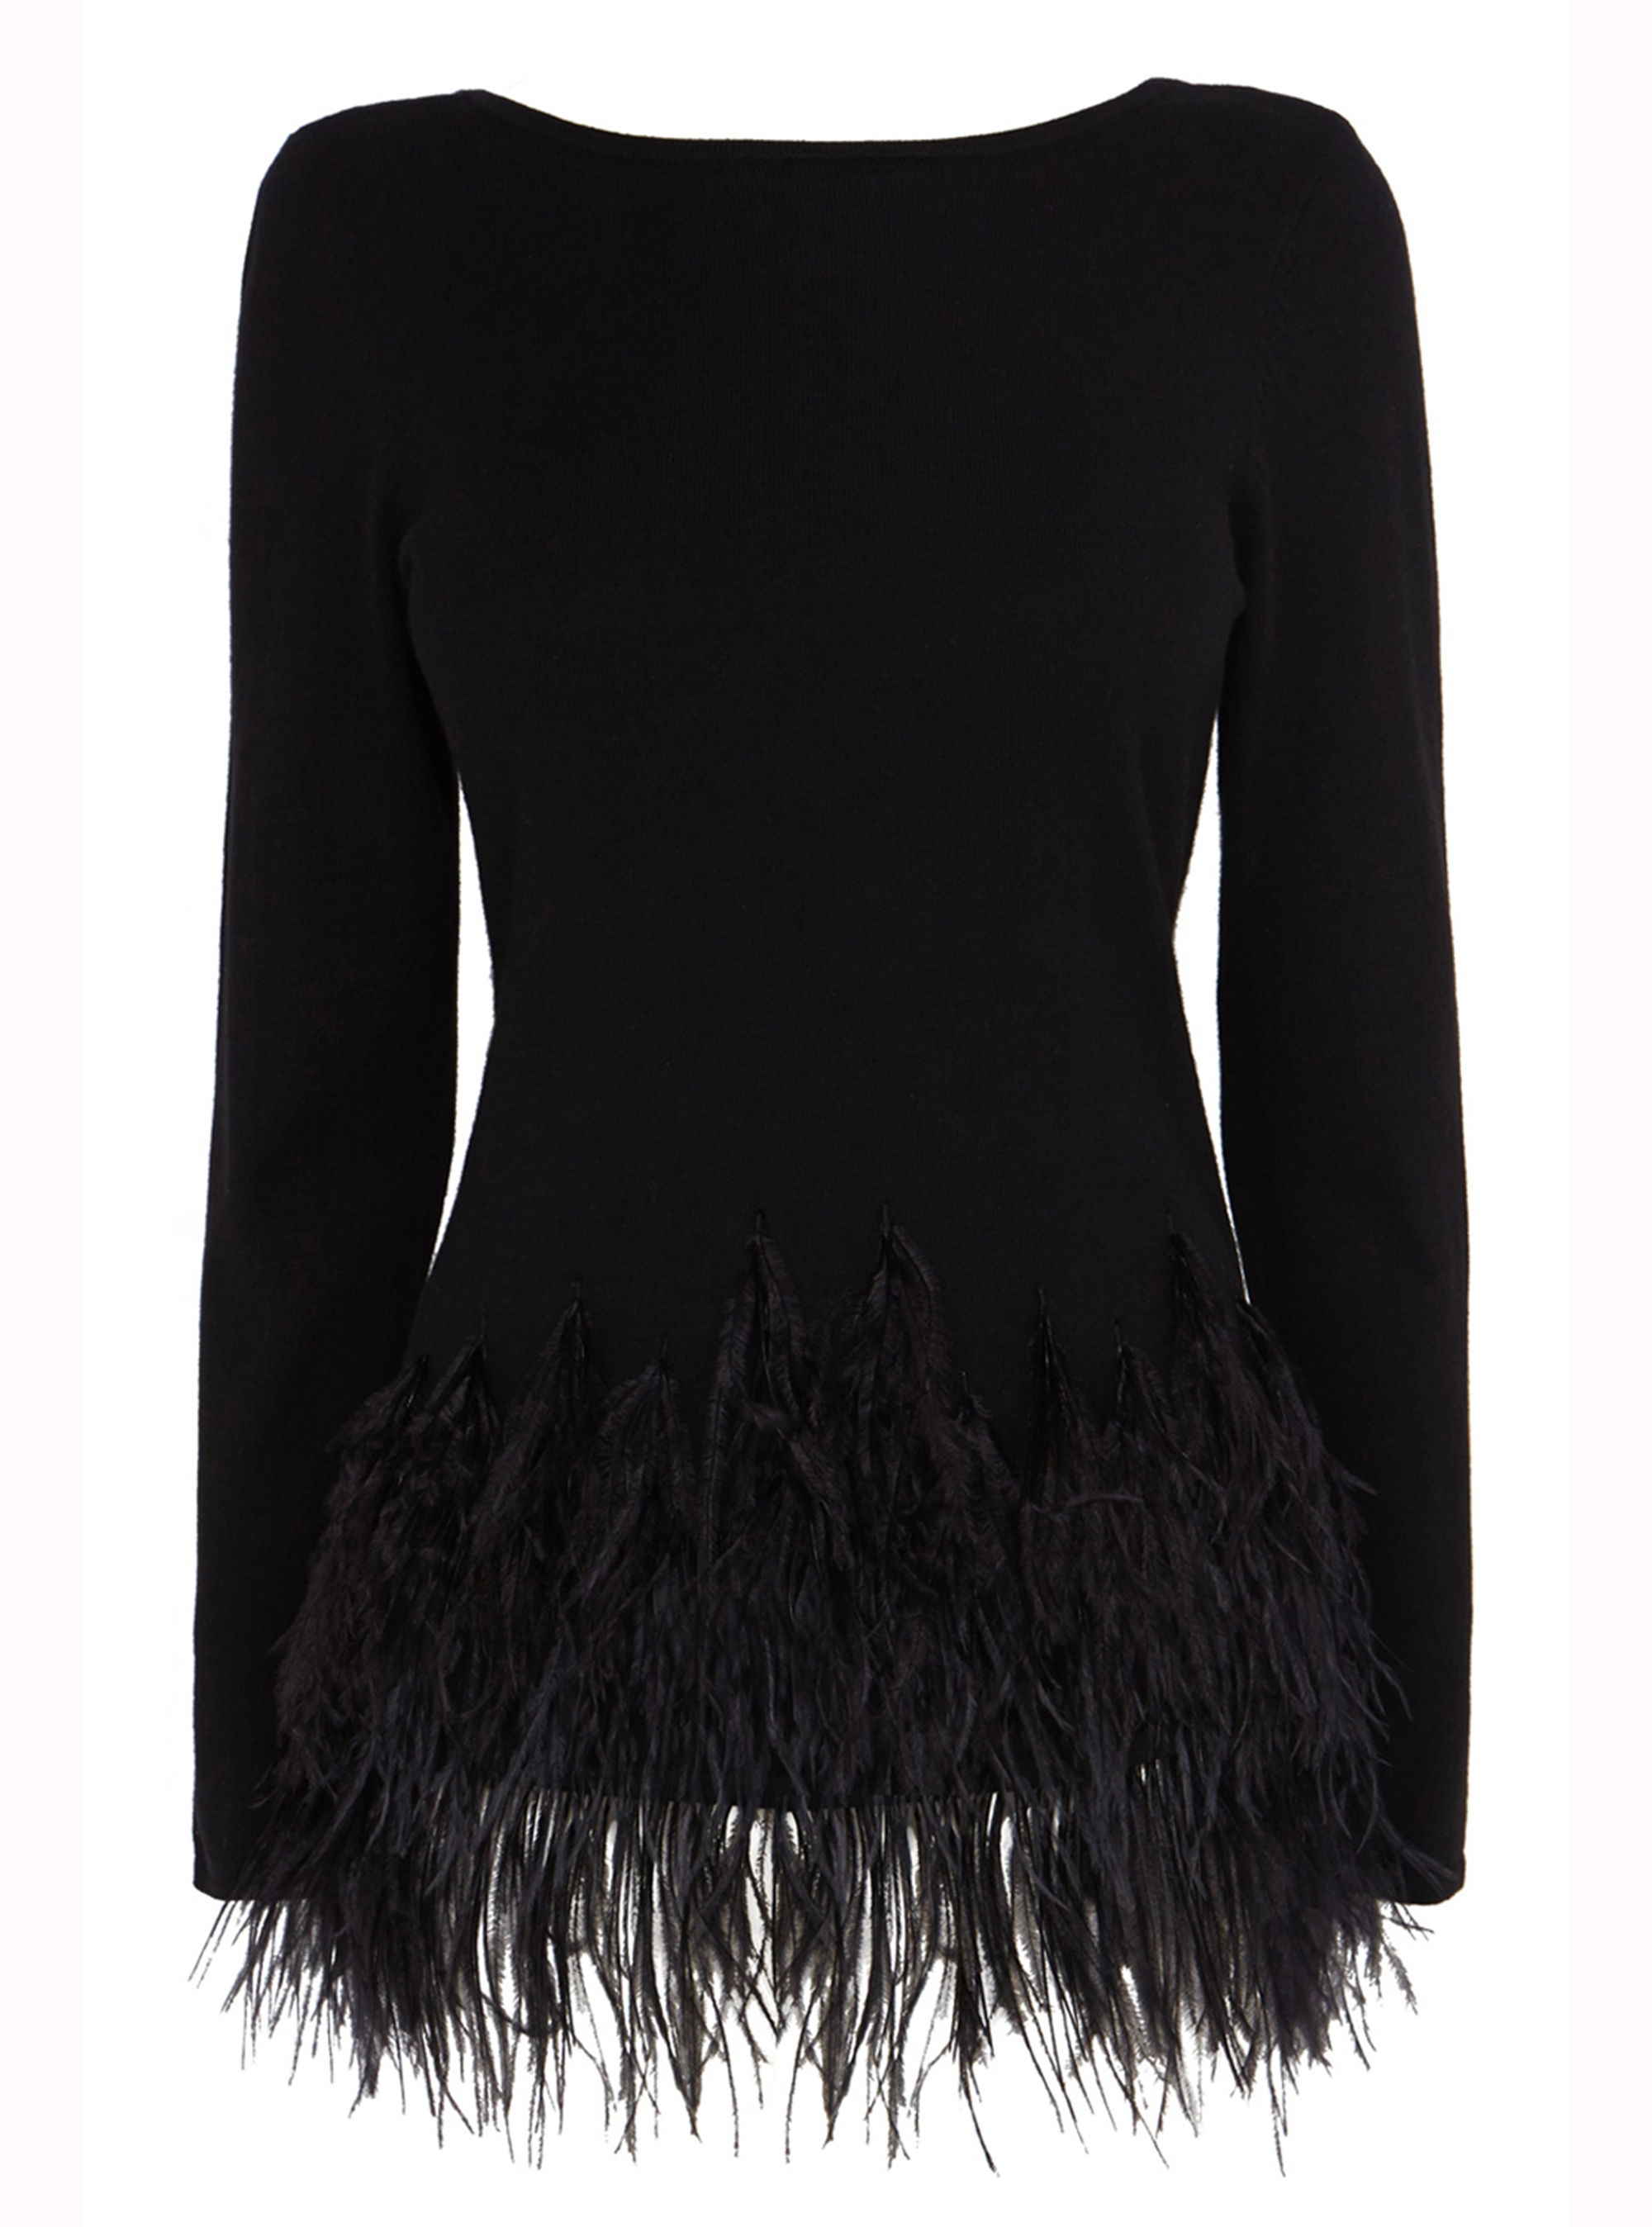 Party outfits - Coast Teaya Feather Knit Top, £995 - Woman And Home